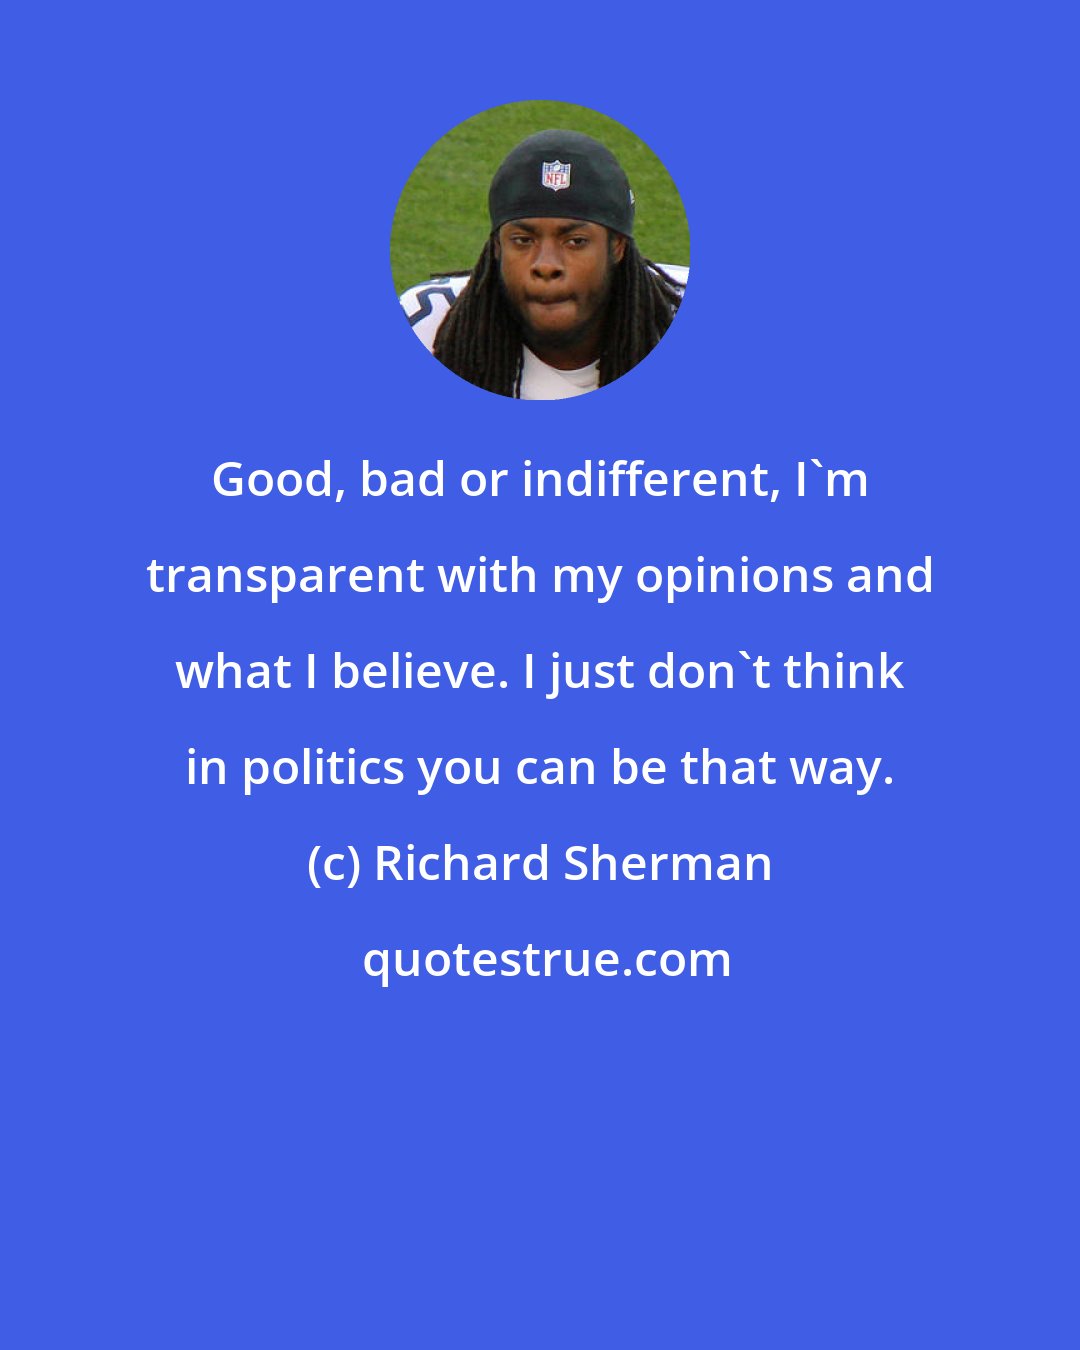 Richard Sherman: Good, bad or indifferent, I'm transparent with my opinions and what I believe. I just don't think in politics you can be that way.